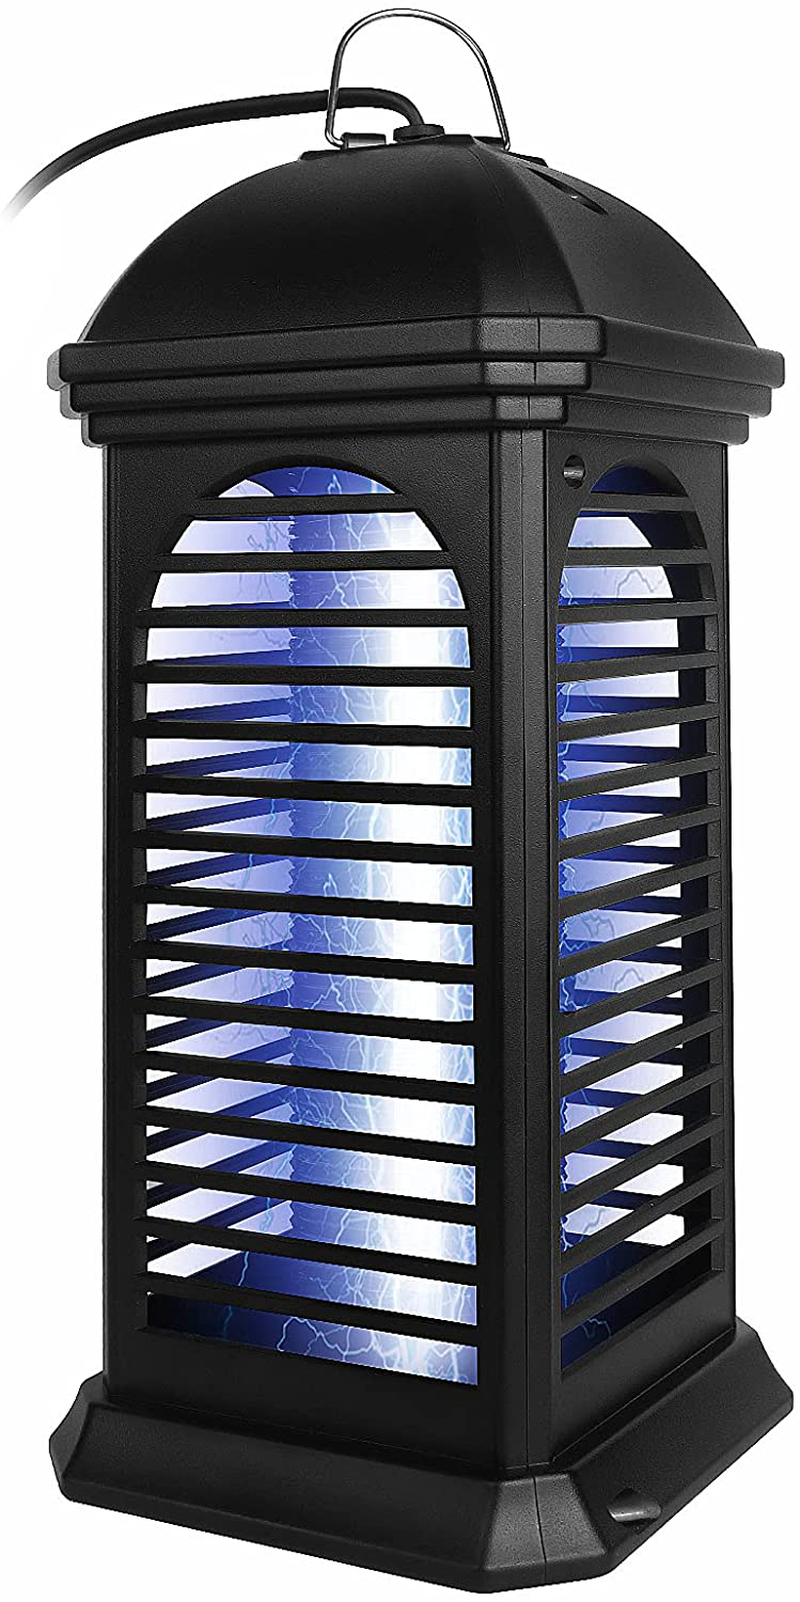 FBMPTA Bug Zapper Mosquito Killer, Flying Insect Killer Indoor, Fly Traps, Mosquito Lamp, Insect Zappers, Electric Mosquito Attractant Trap Plug in for Home, Patio, Garden (Square)